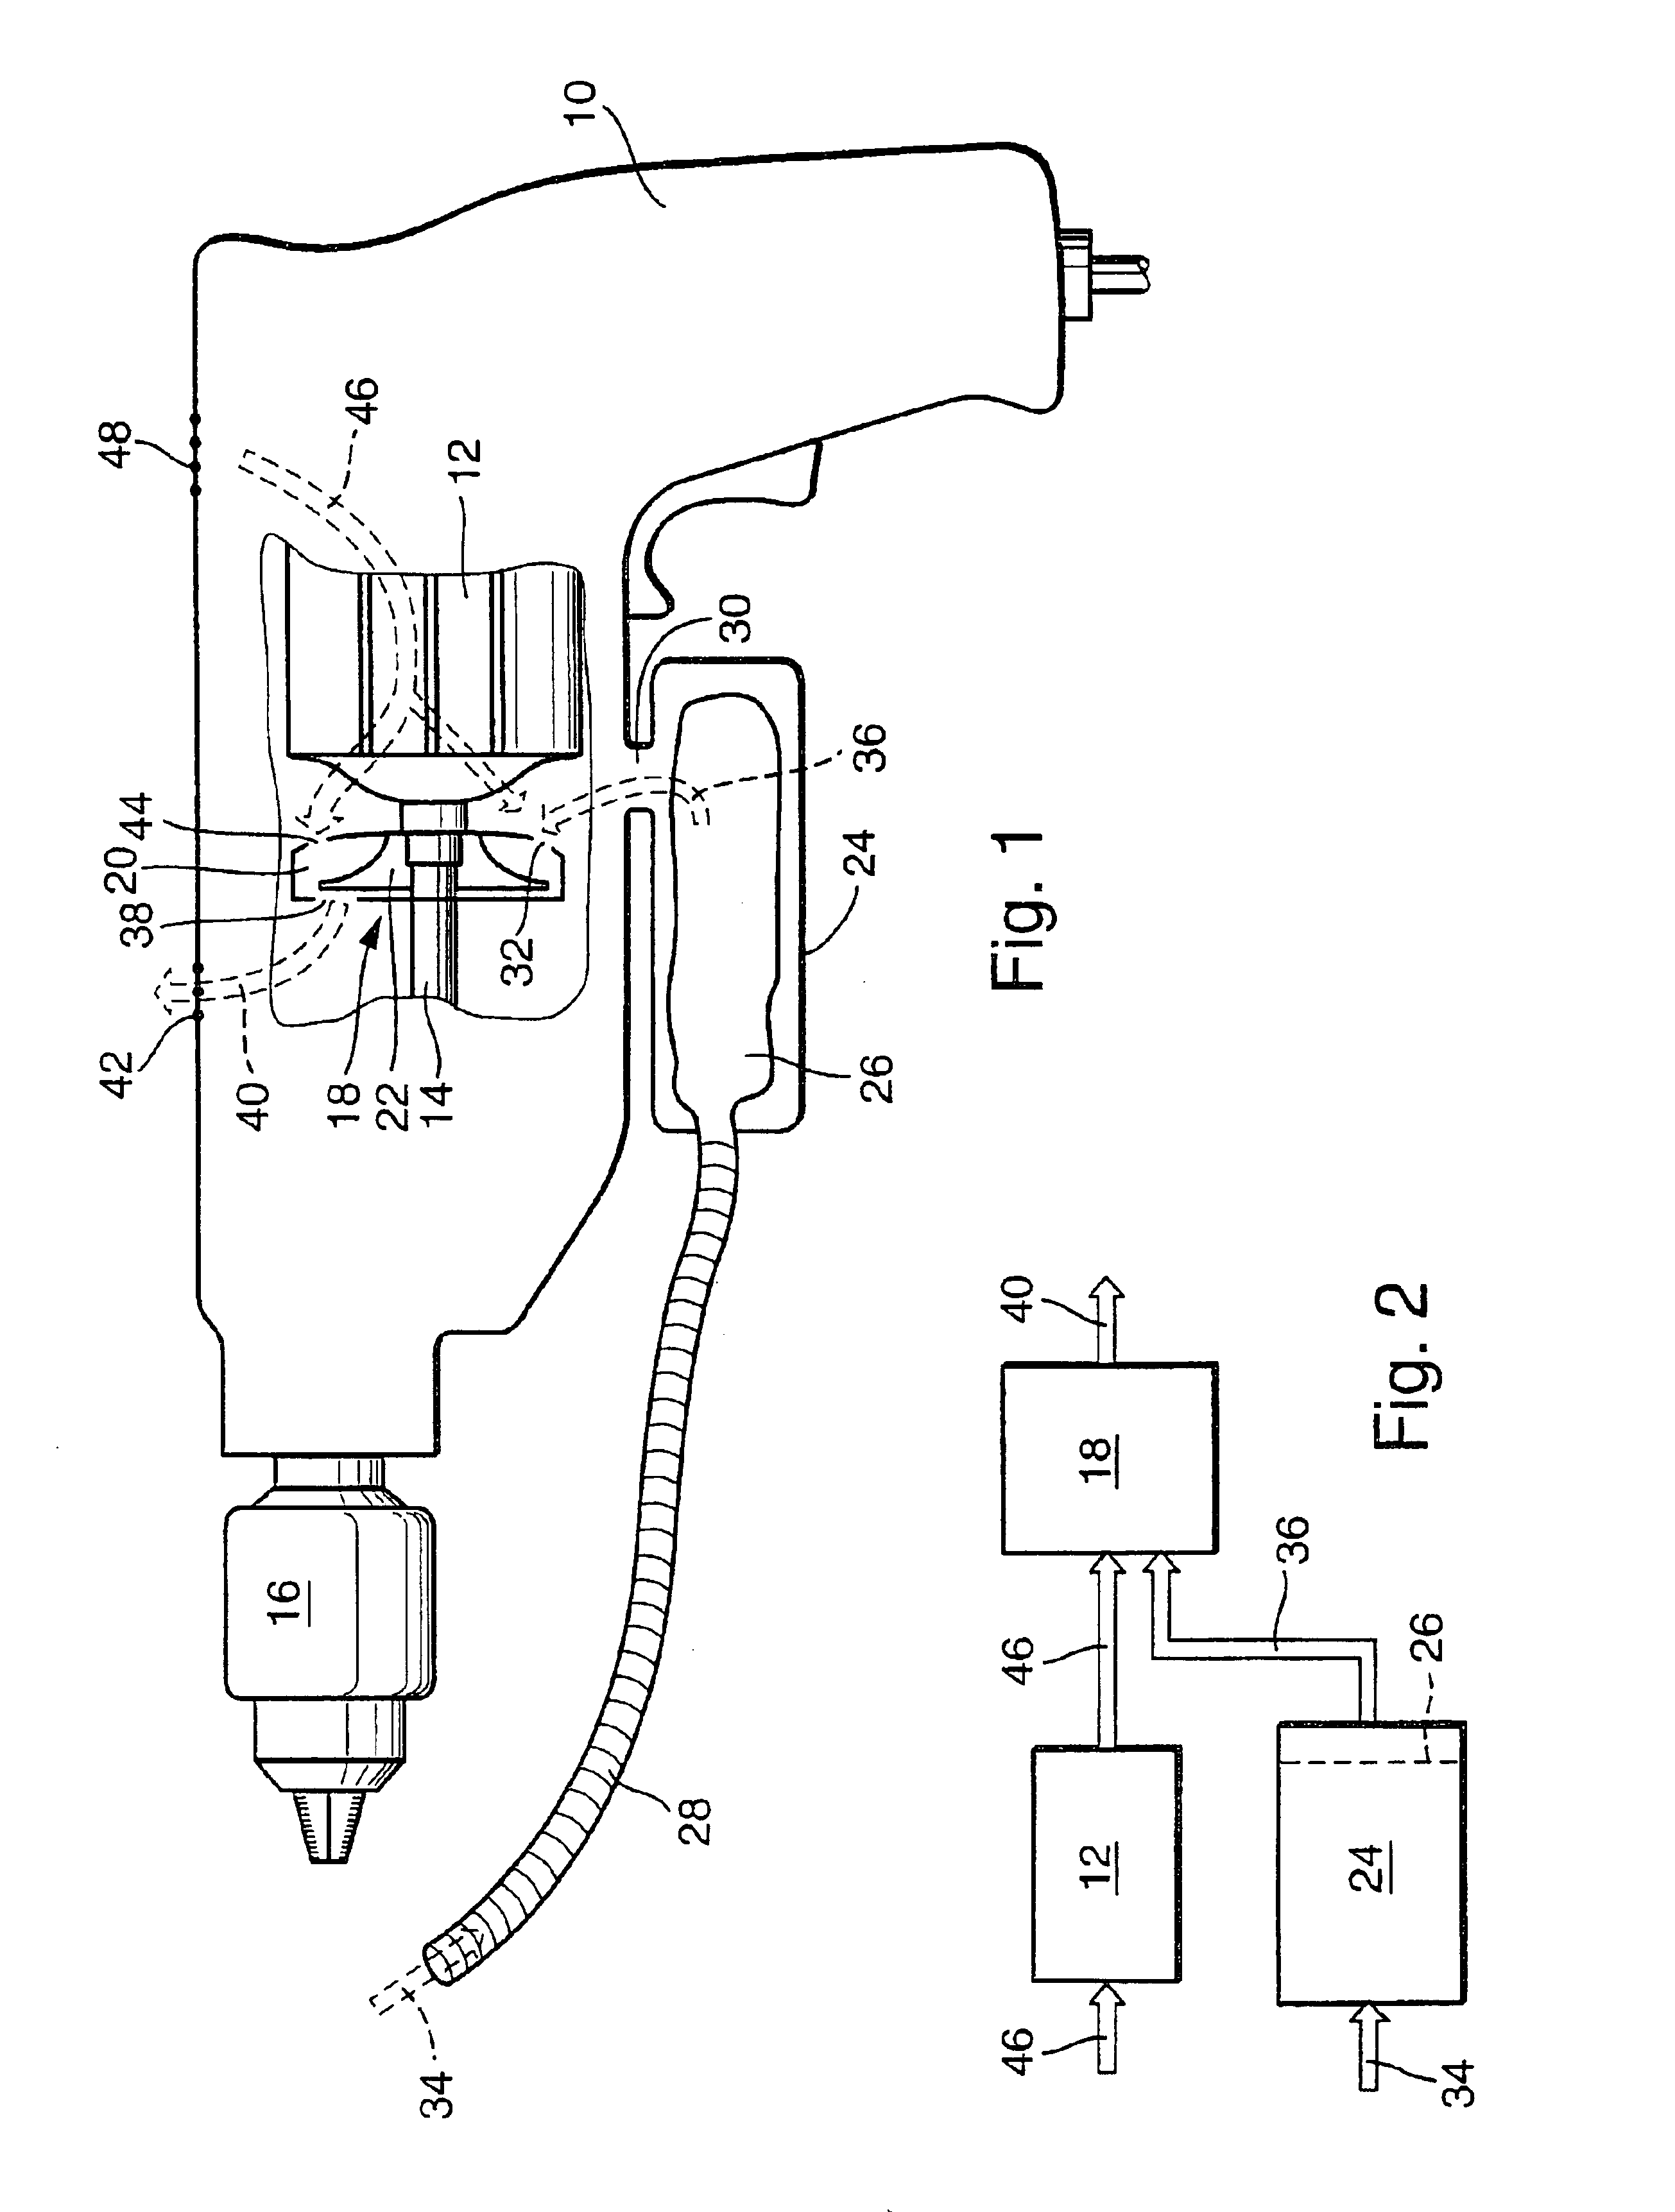 Hand tool comprising a dust suction device